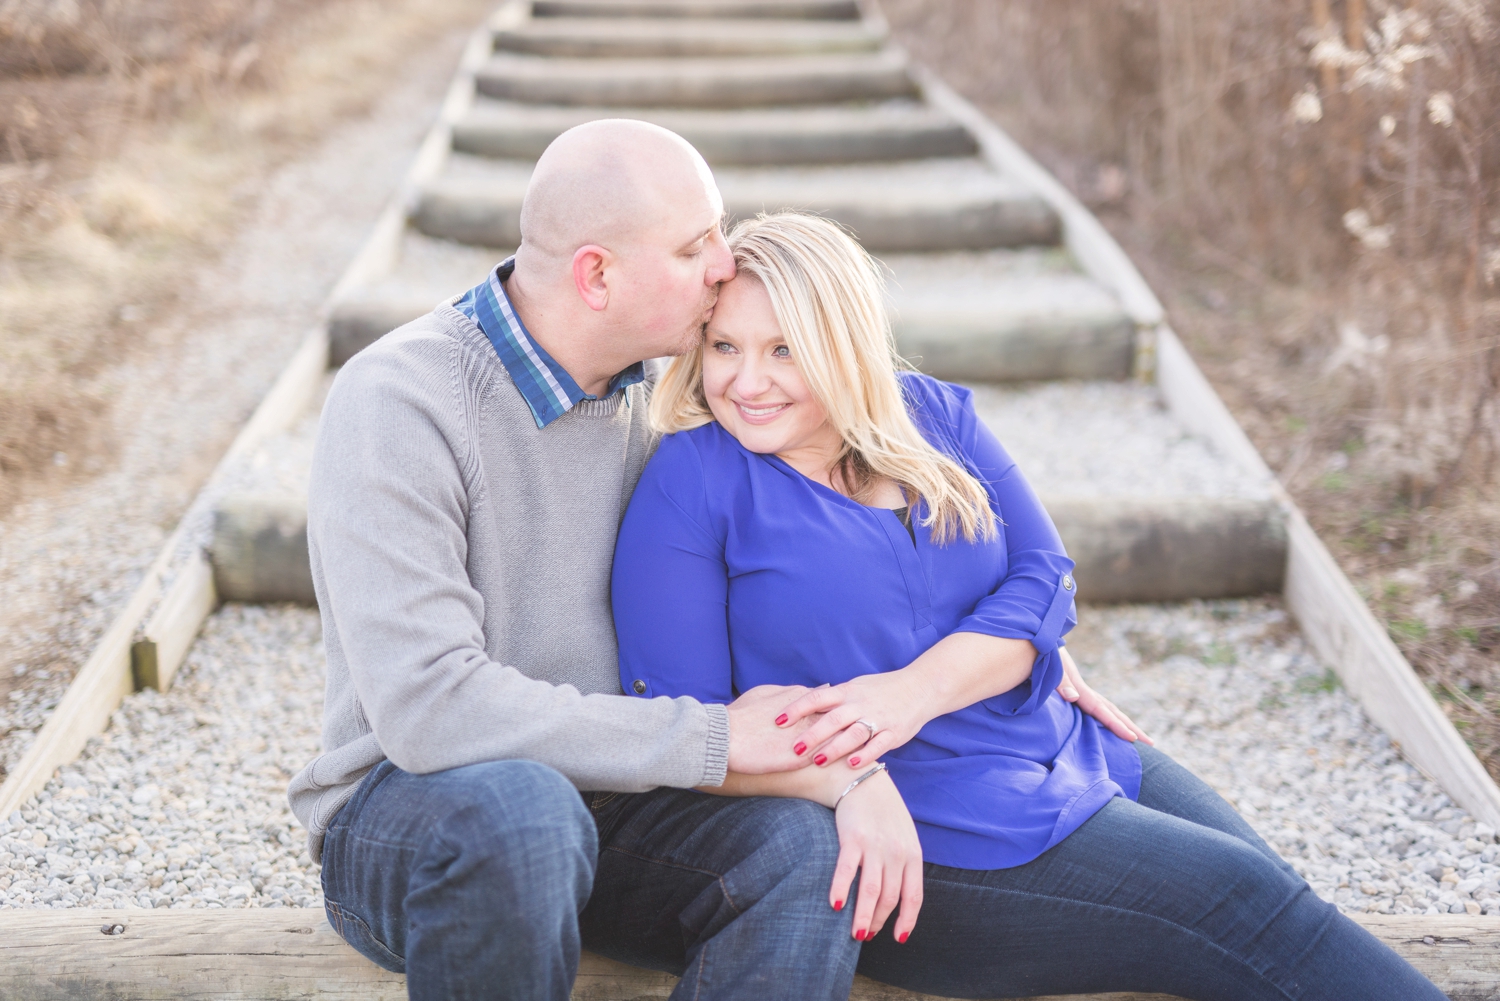 winter-engaged-couple-at-their-photo-session-at-the-scioto-audubon-park-near-grange-audubon-center-with-walkways-and-grass_0337